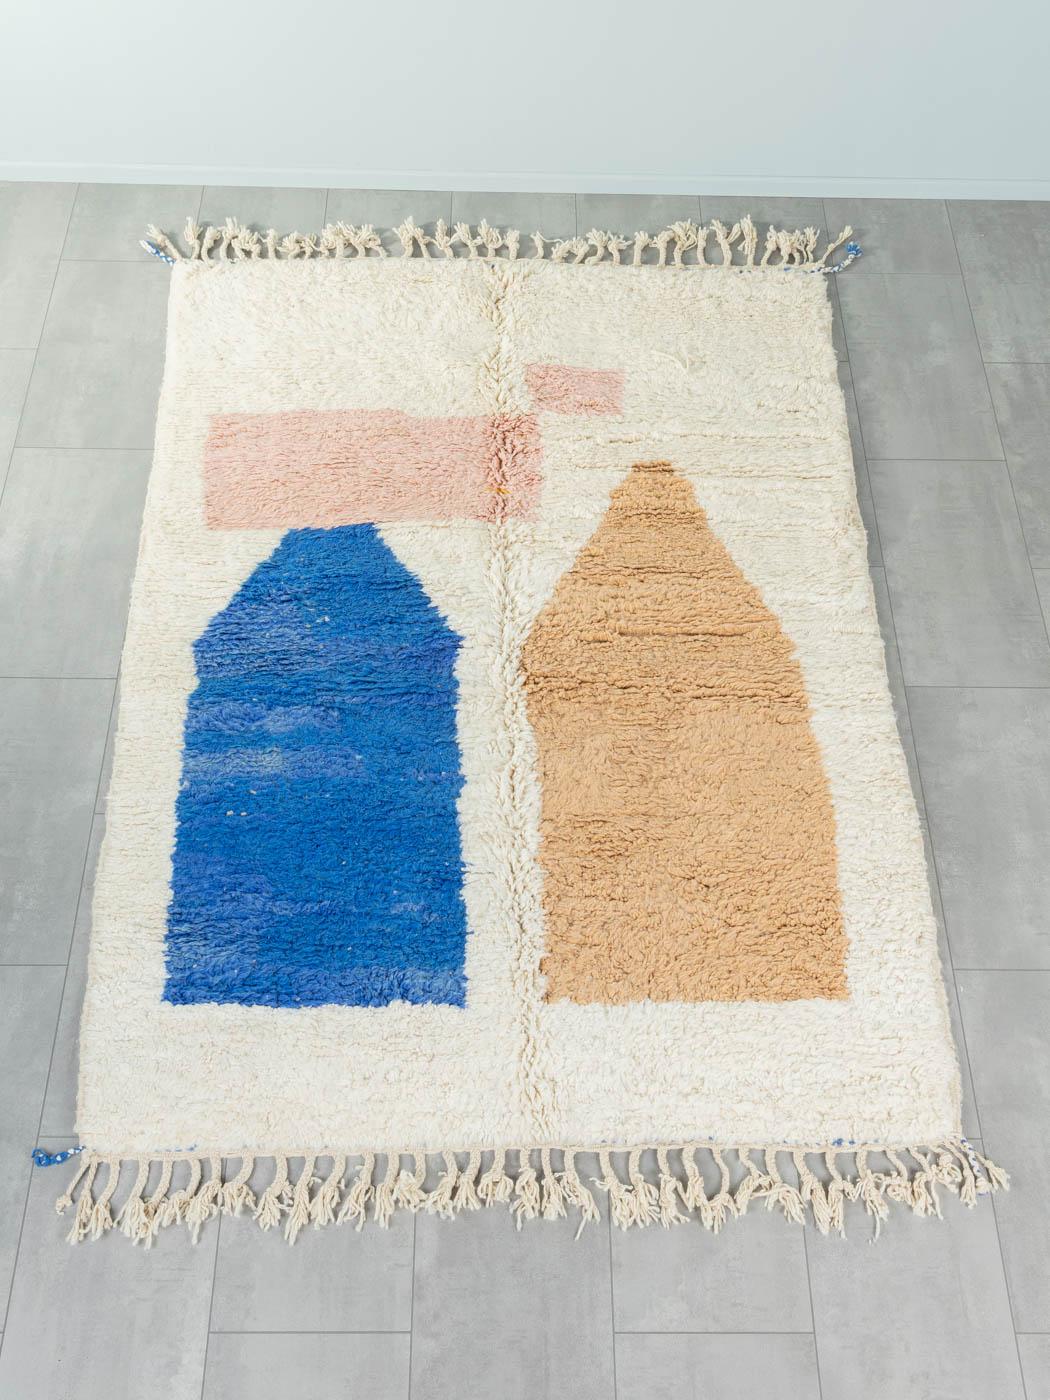 Equilibrium II is a contemporary 100% wool rug – thick and soft, comfortable underfoot. Our Berber rugs are handwoven and handknotted by Amazigh women in the Atlas Mountains. These communities have been crafting rugs for thousands of years. One knot